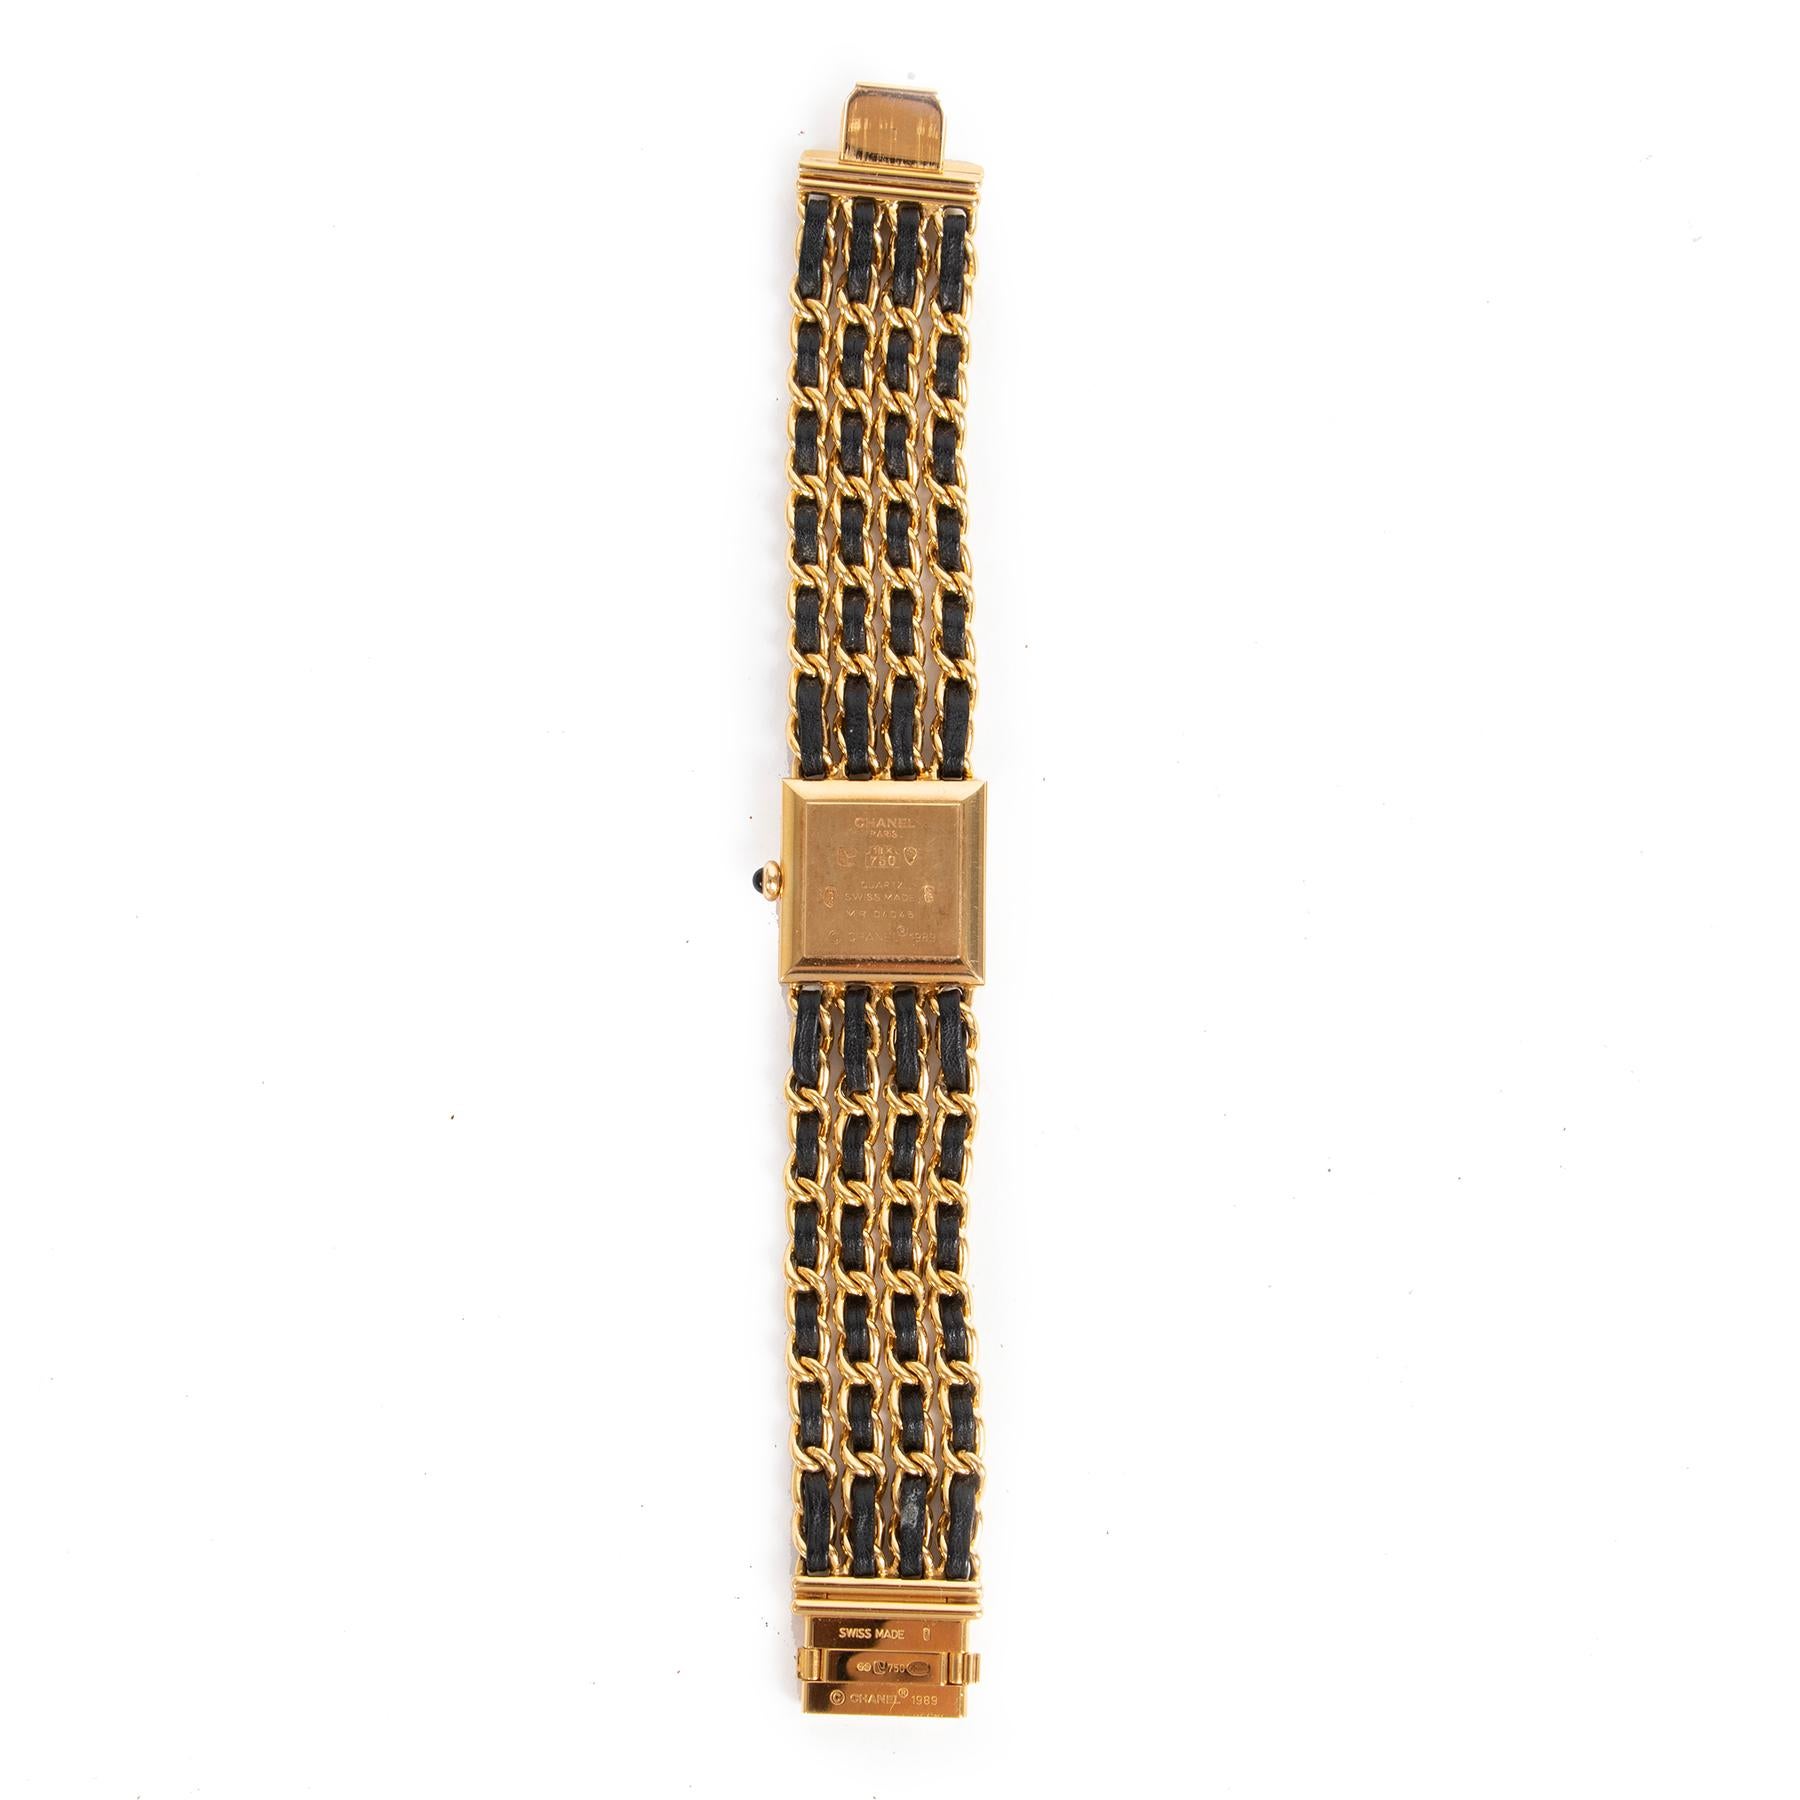 Very good condition

Chanel Woven Chain Mademoiselle 18K Watch

Get yourself an absolutely iconic piece with this Chanel Mademoiselle watch. This rare and highly covetable piece features the signature woven chain and is crafted from 18 karat gold.